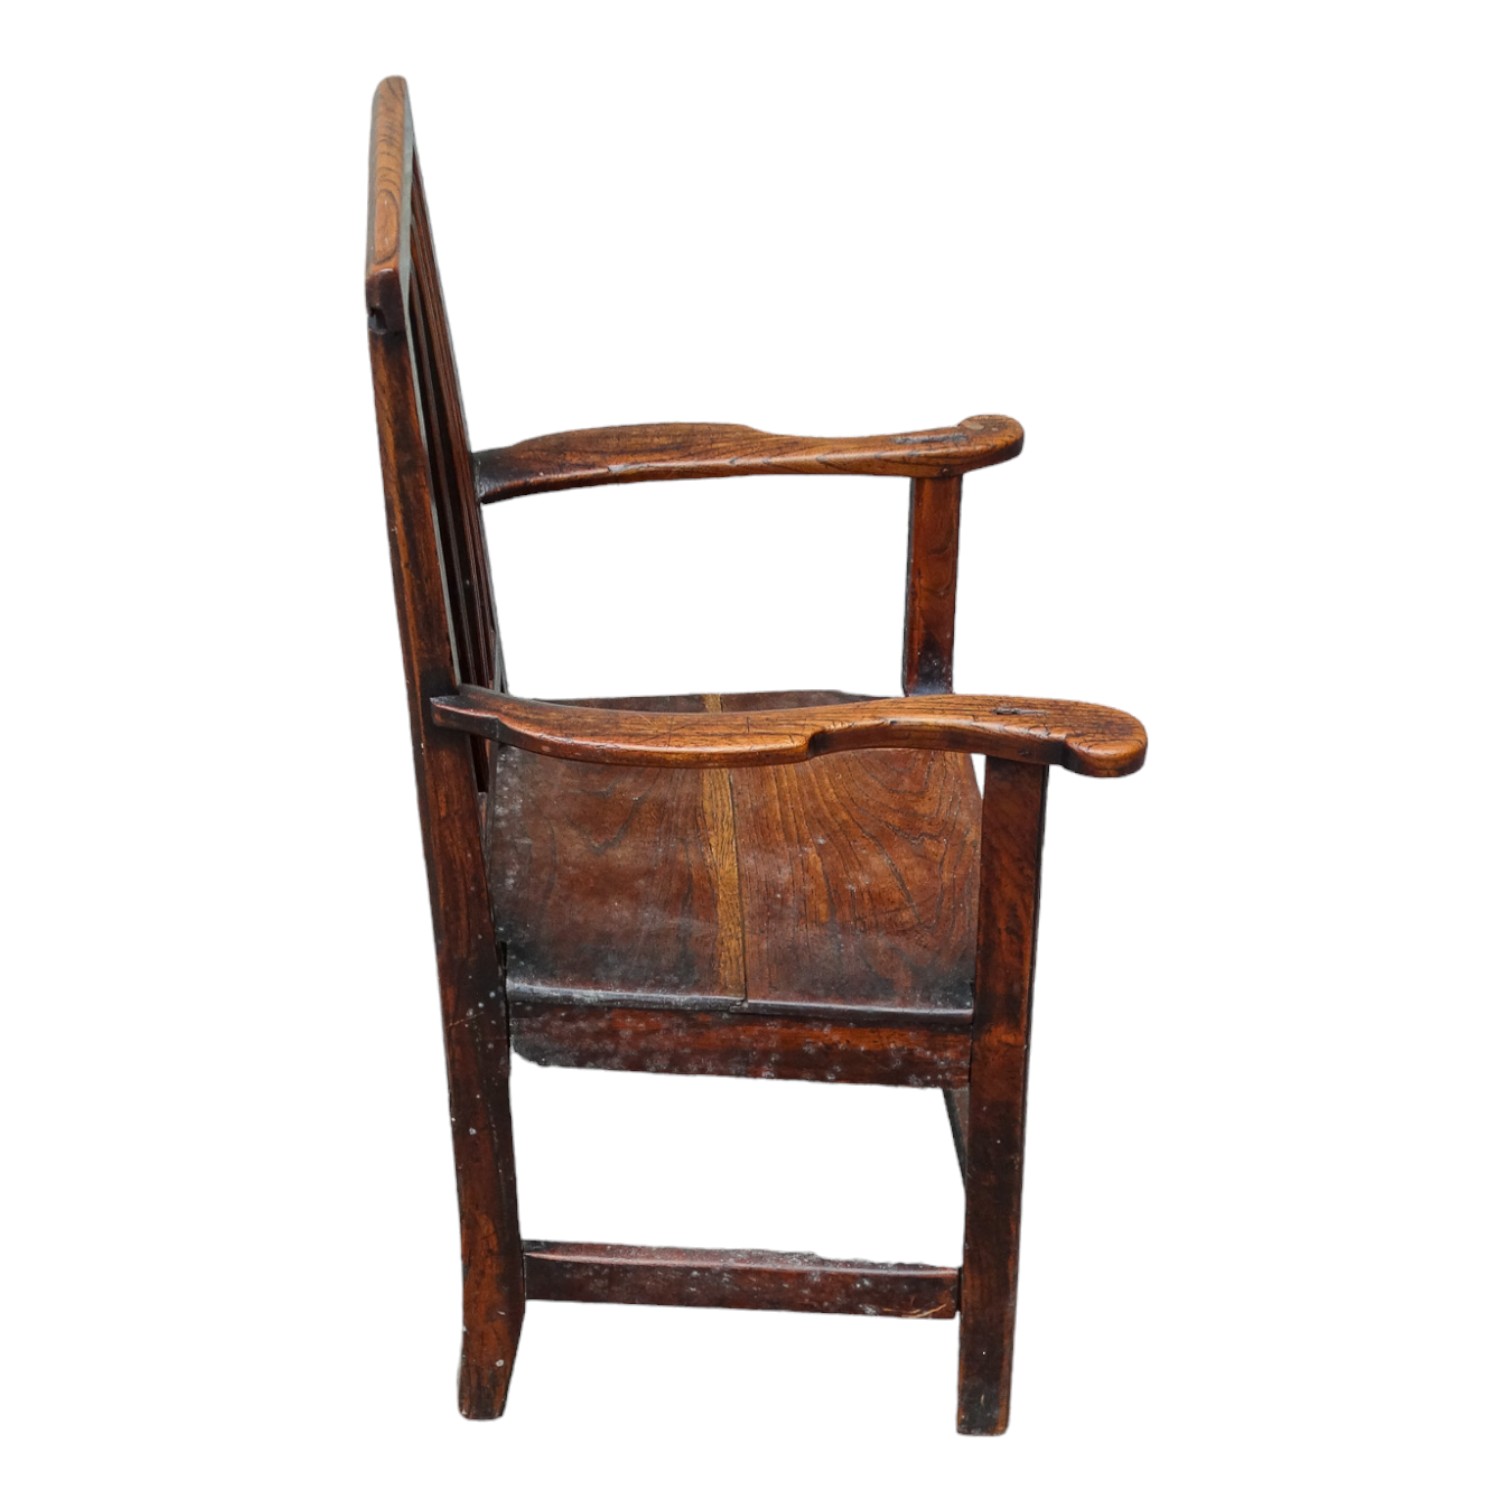 A late 18th century elm child's chair - the stick back above open arms and solid seat on square legs - Image 4 of 5